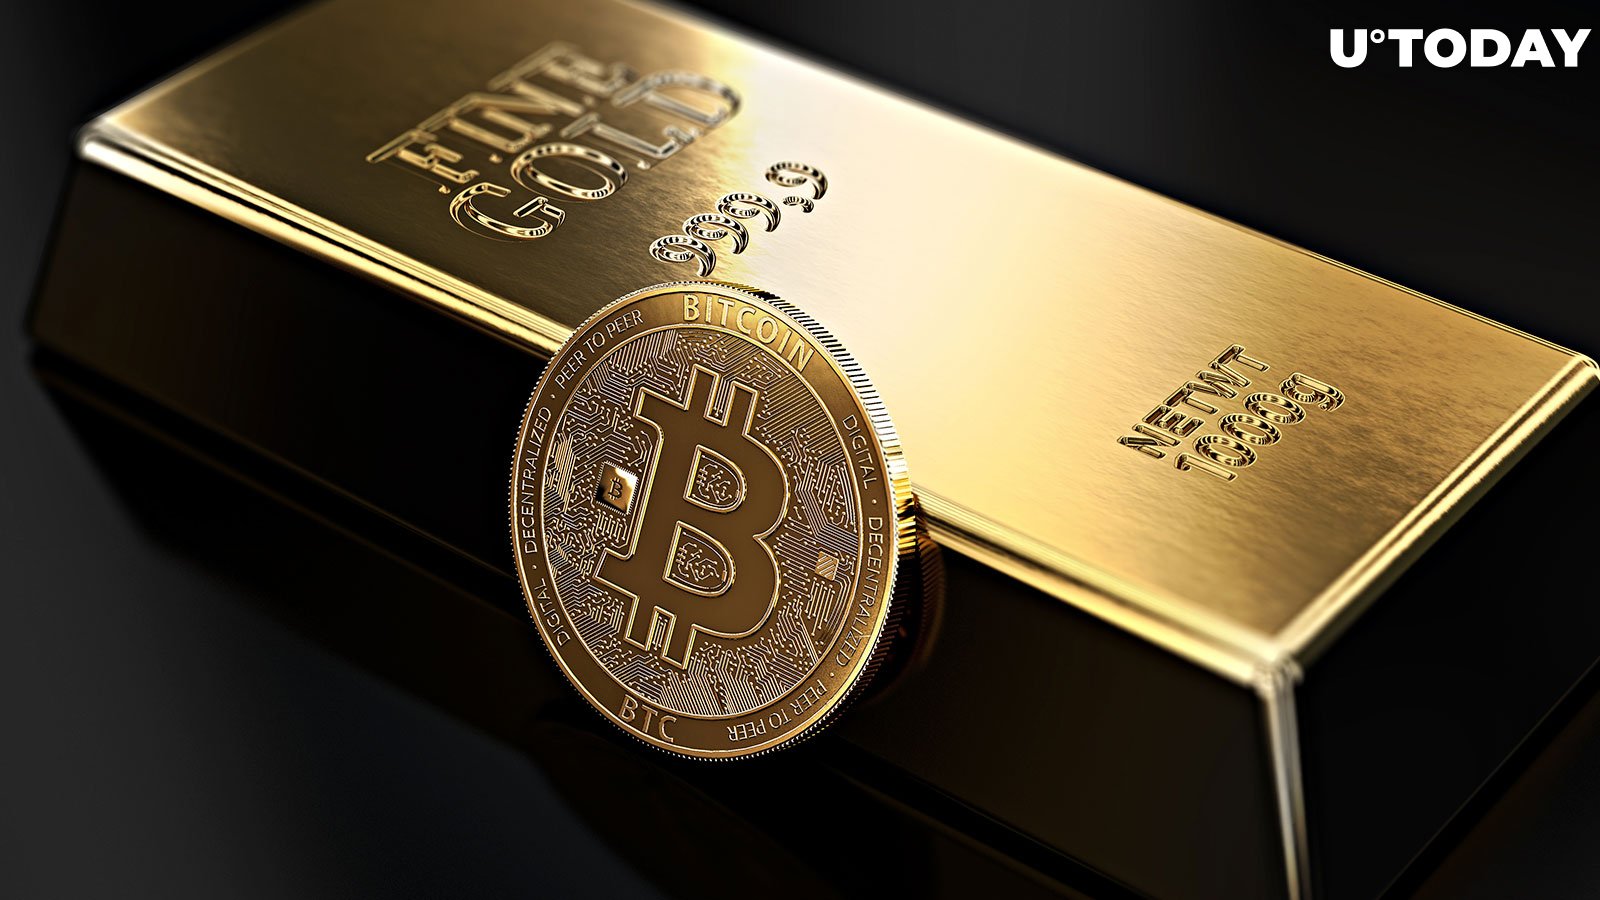 Bitcoin (BTC) Might Reach 98X Price of Gold: Analyst